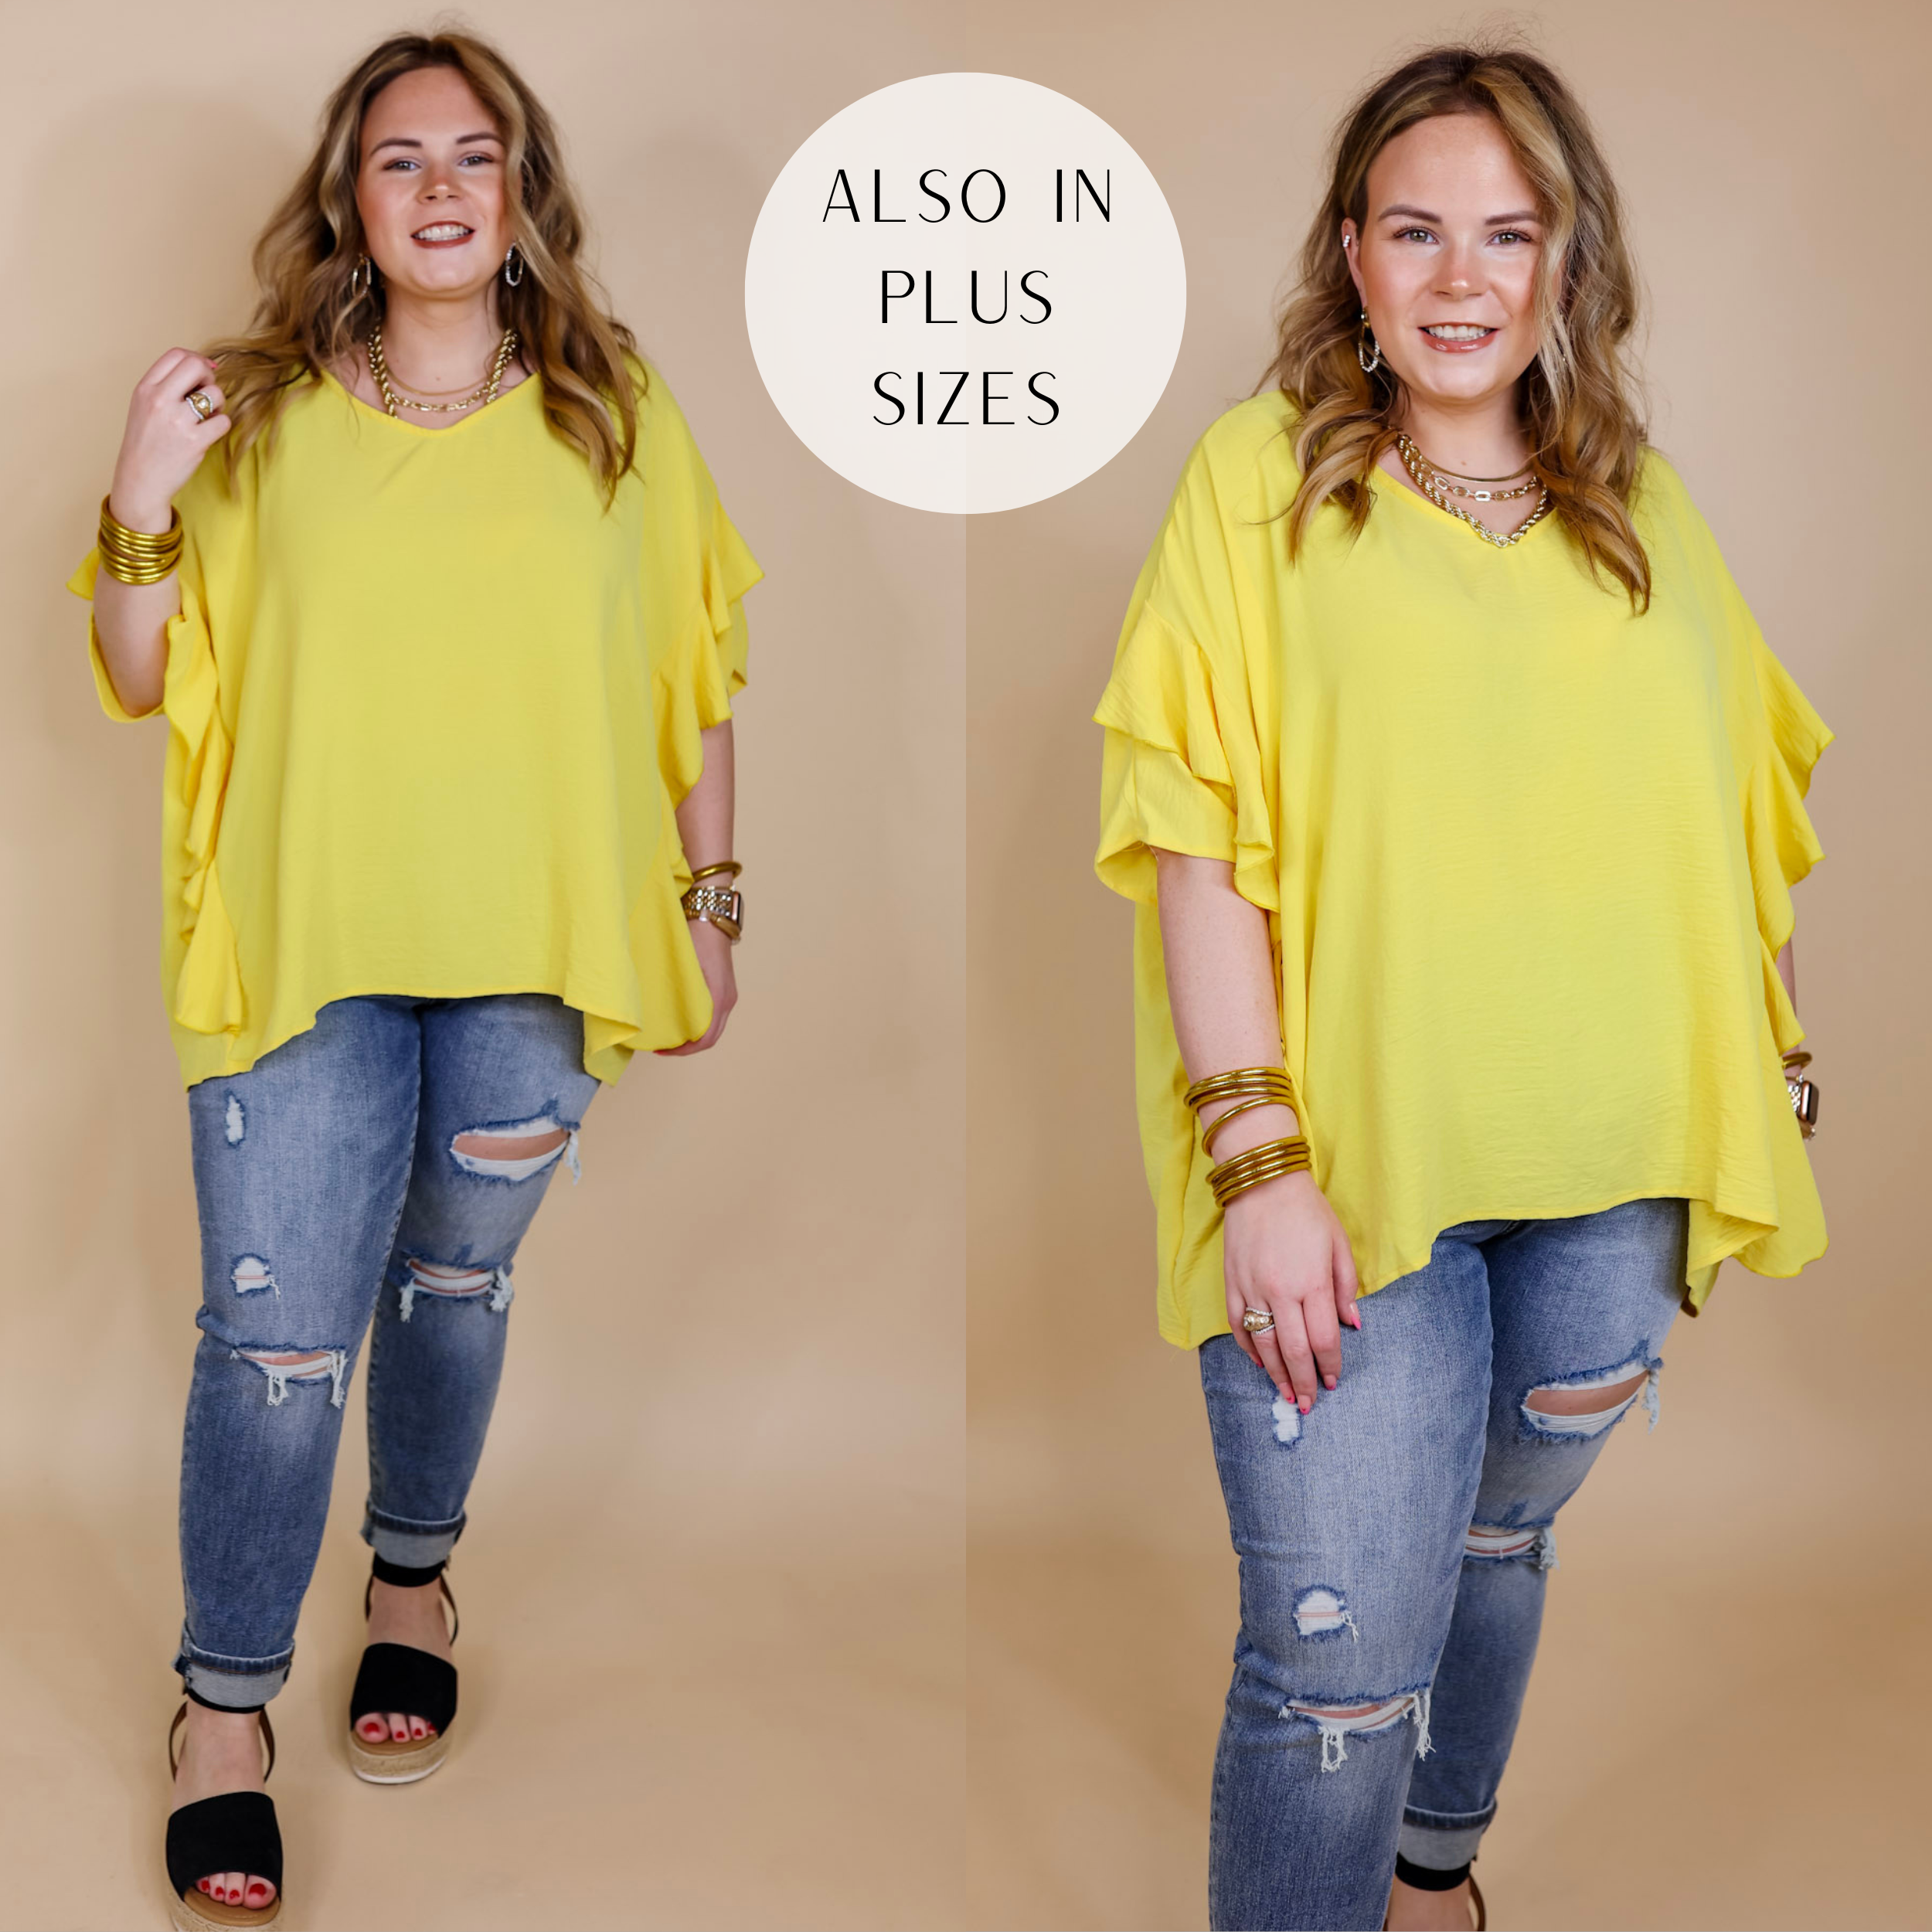 Model is wearing a yellow poncho top with ruffle sleeves and ruffles down the side. Model has it paired with distressed skinny jeans, black sandals, and gold jewelry.